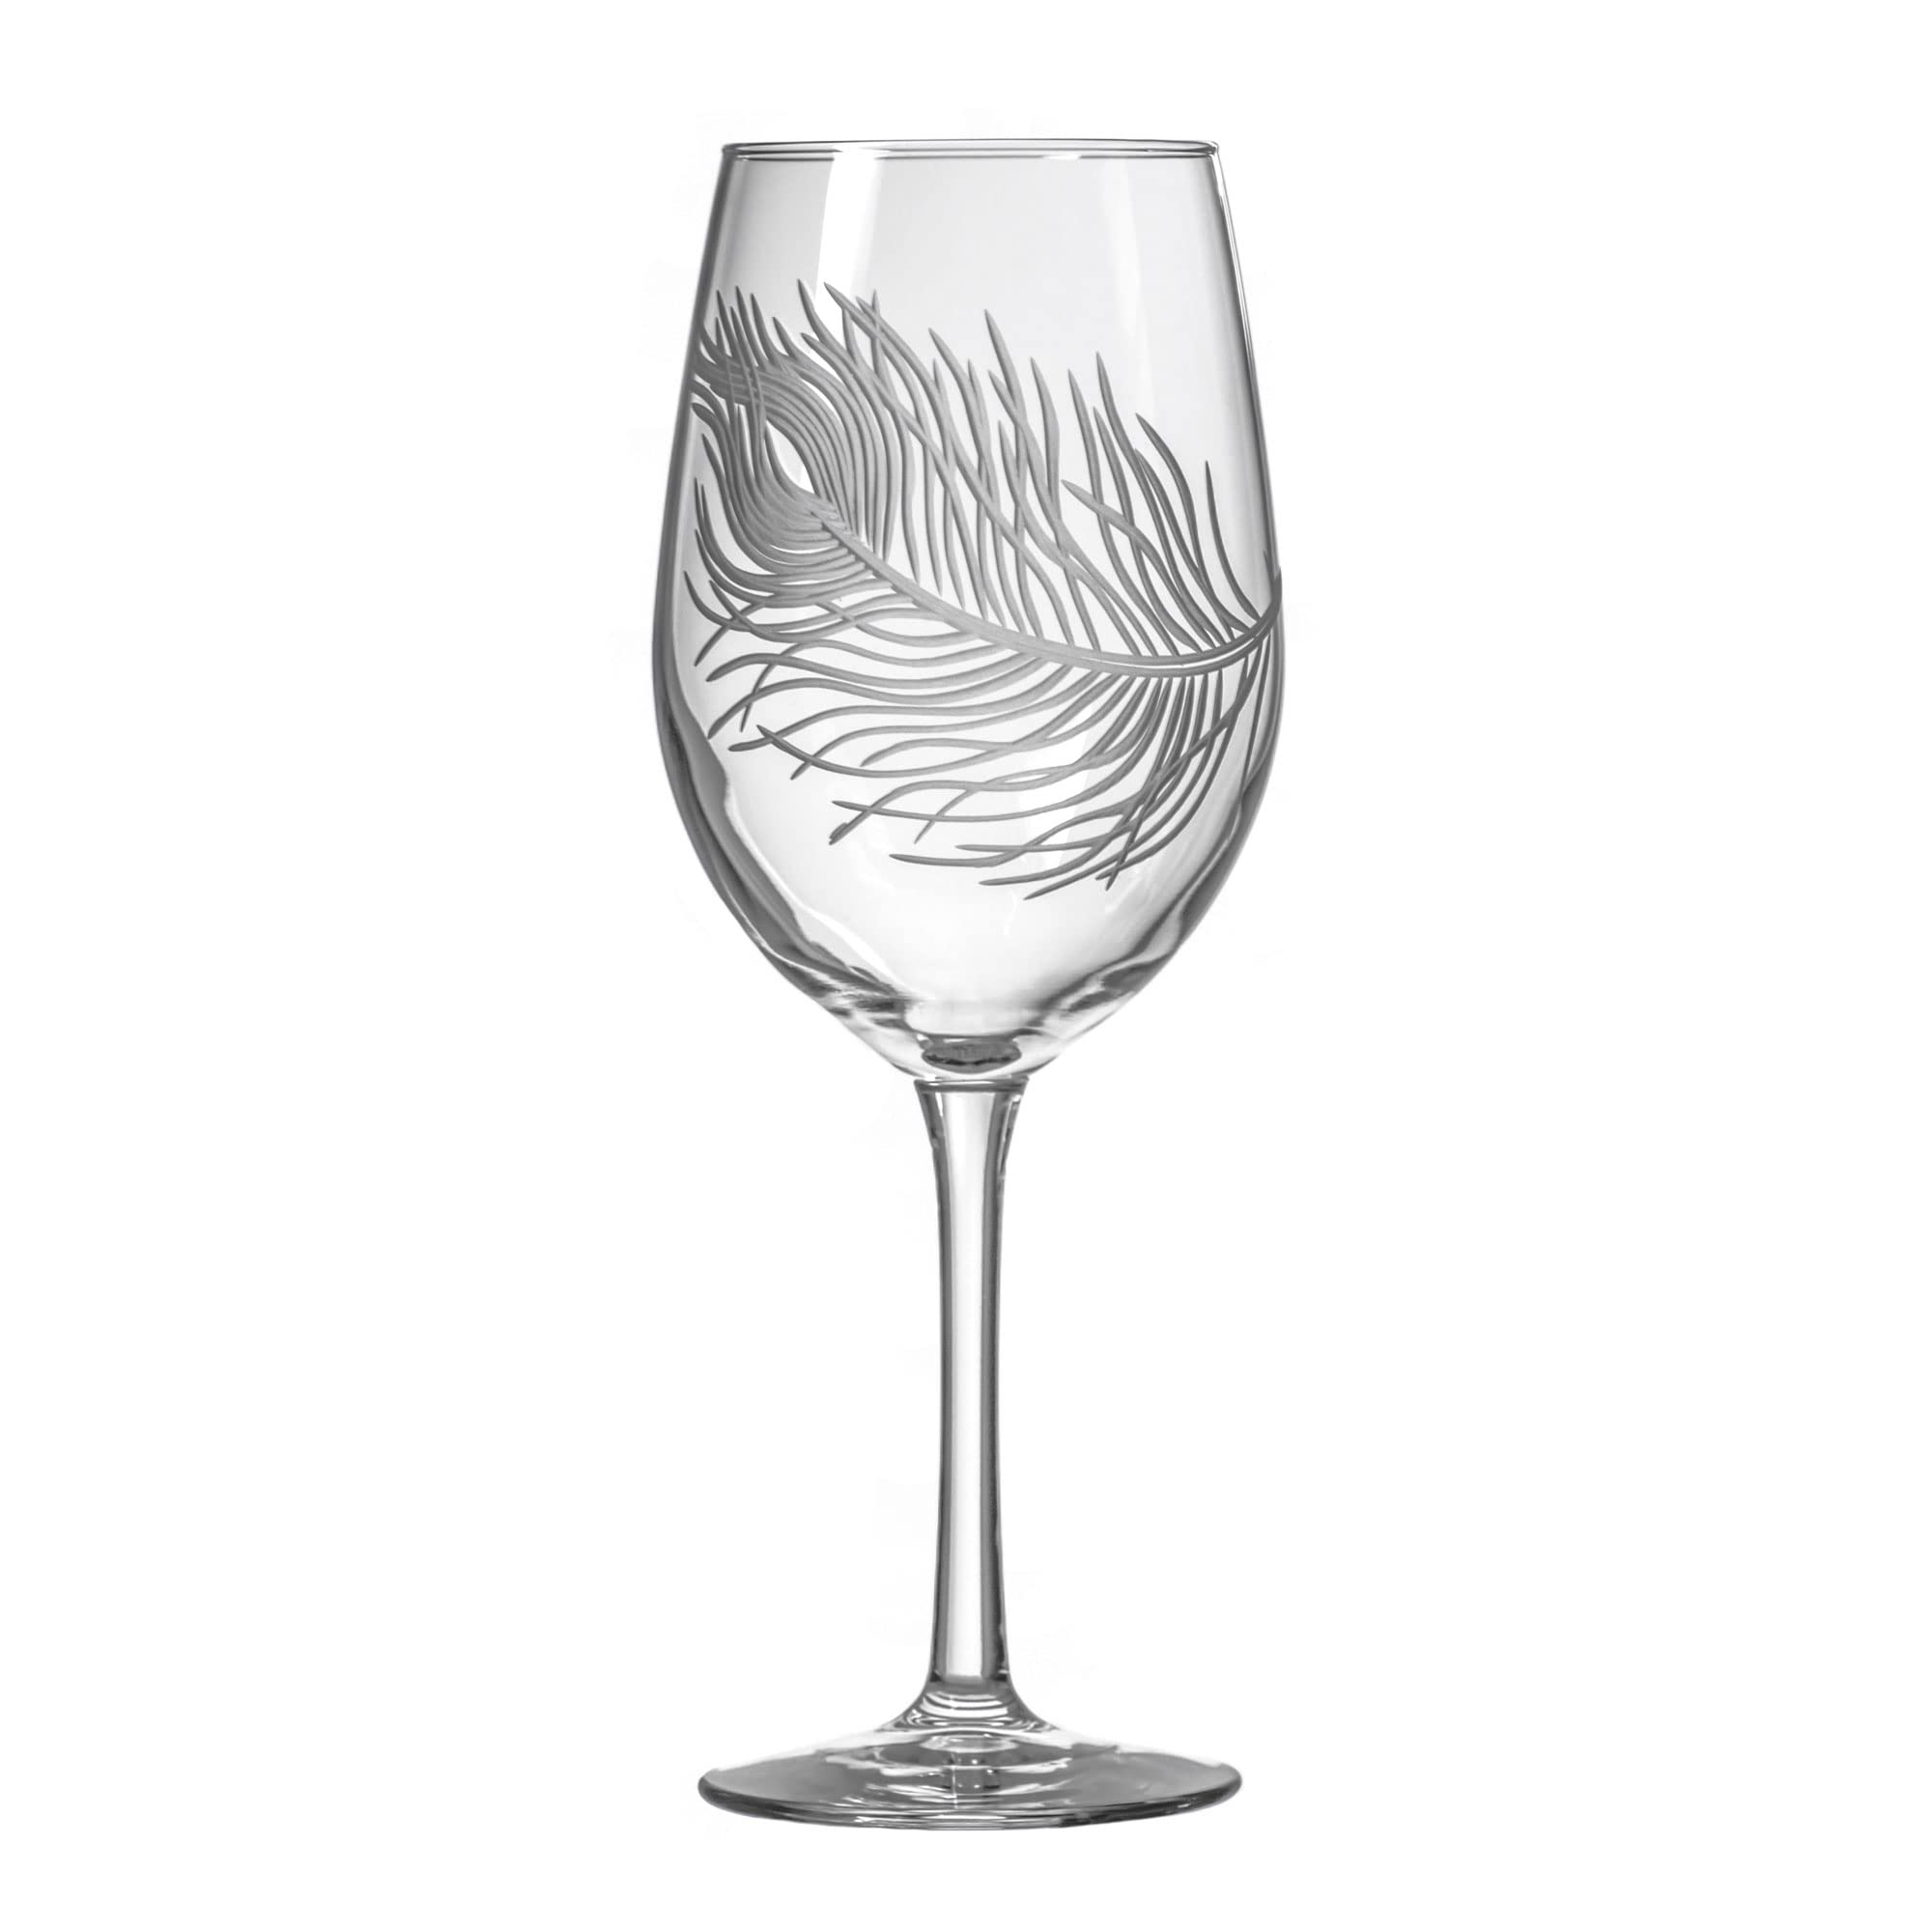 Rolf Glass Peacock White Wine Glass (Set of 4), 12 oz, Clear